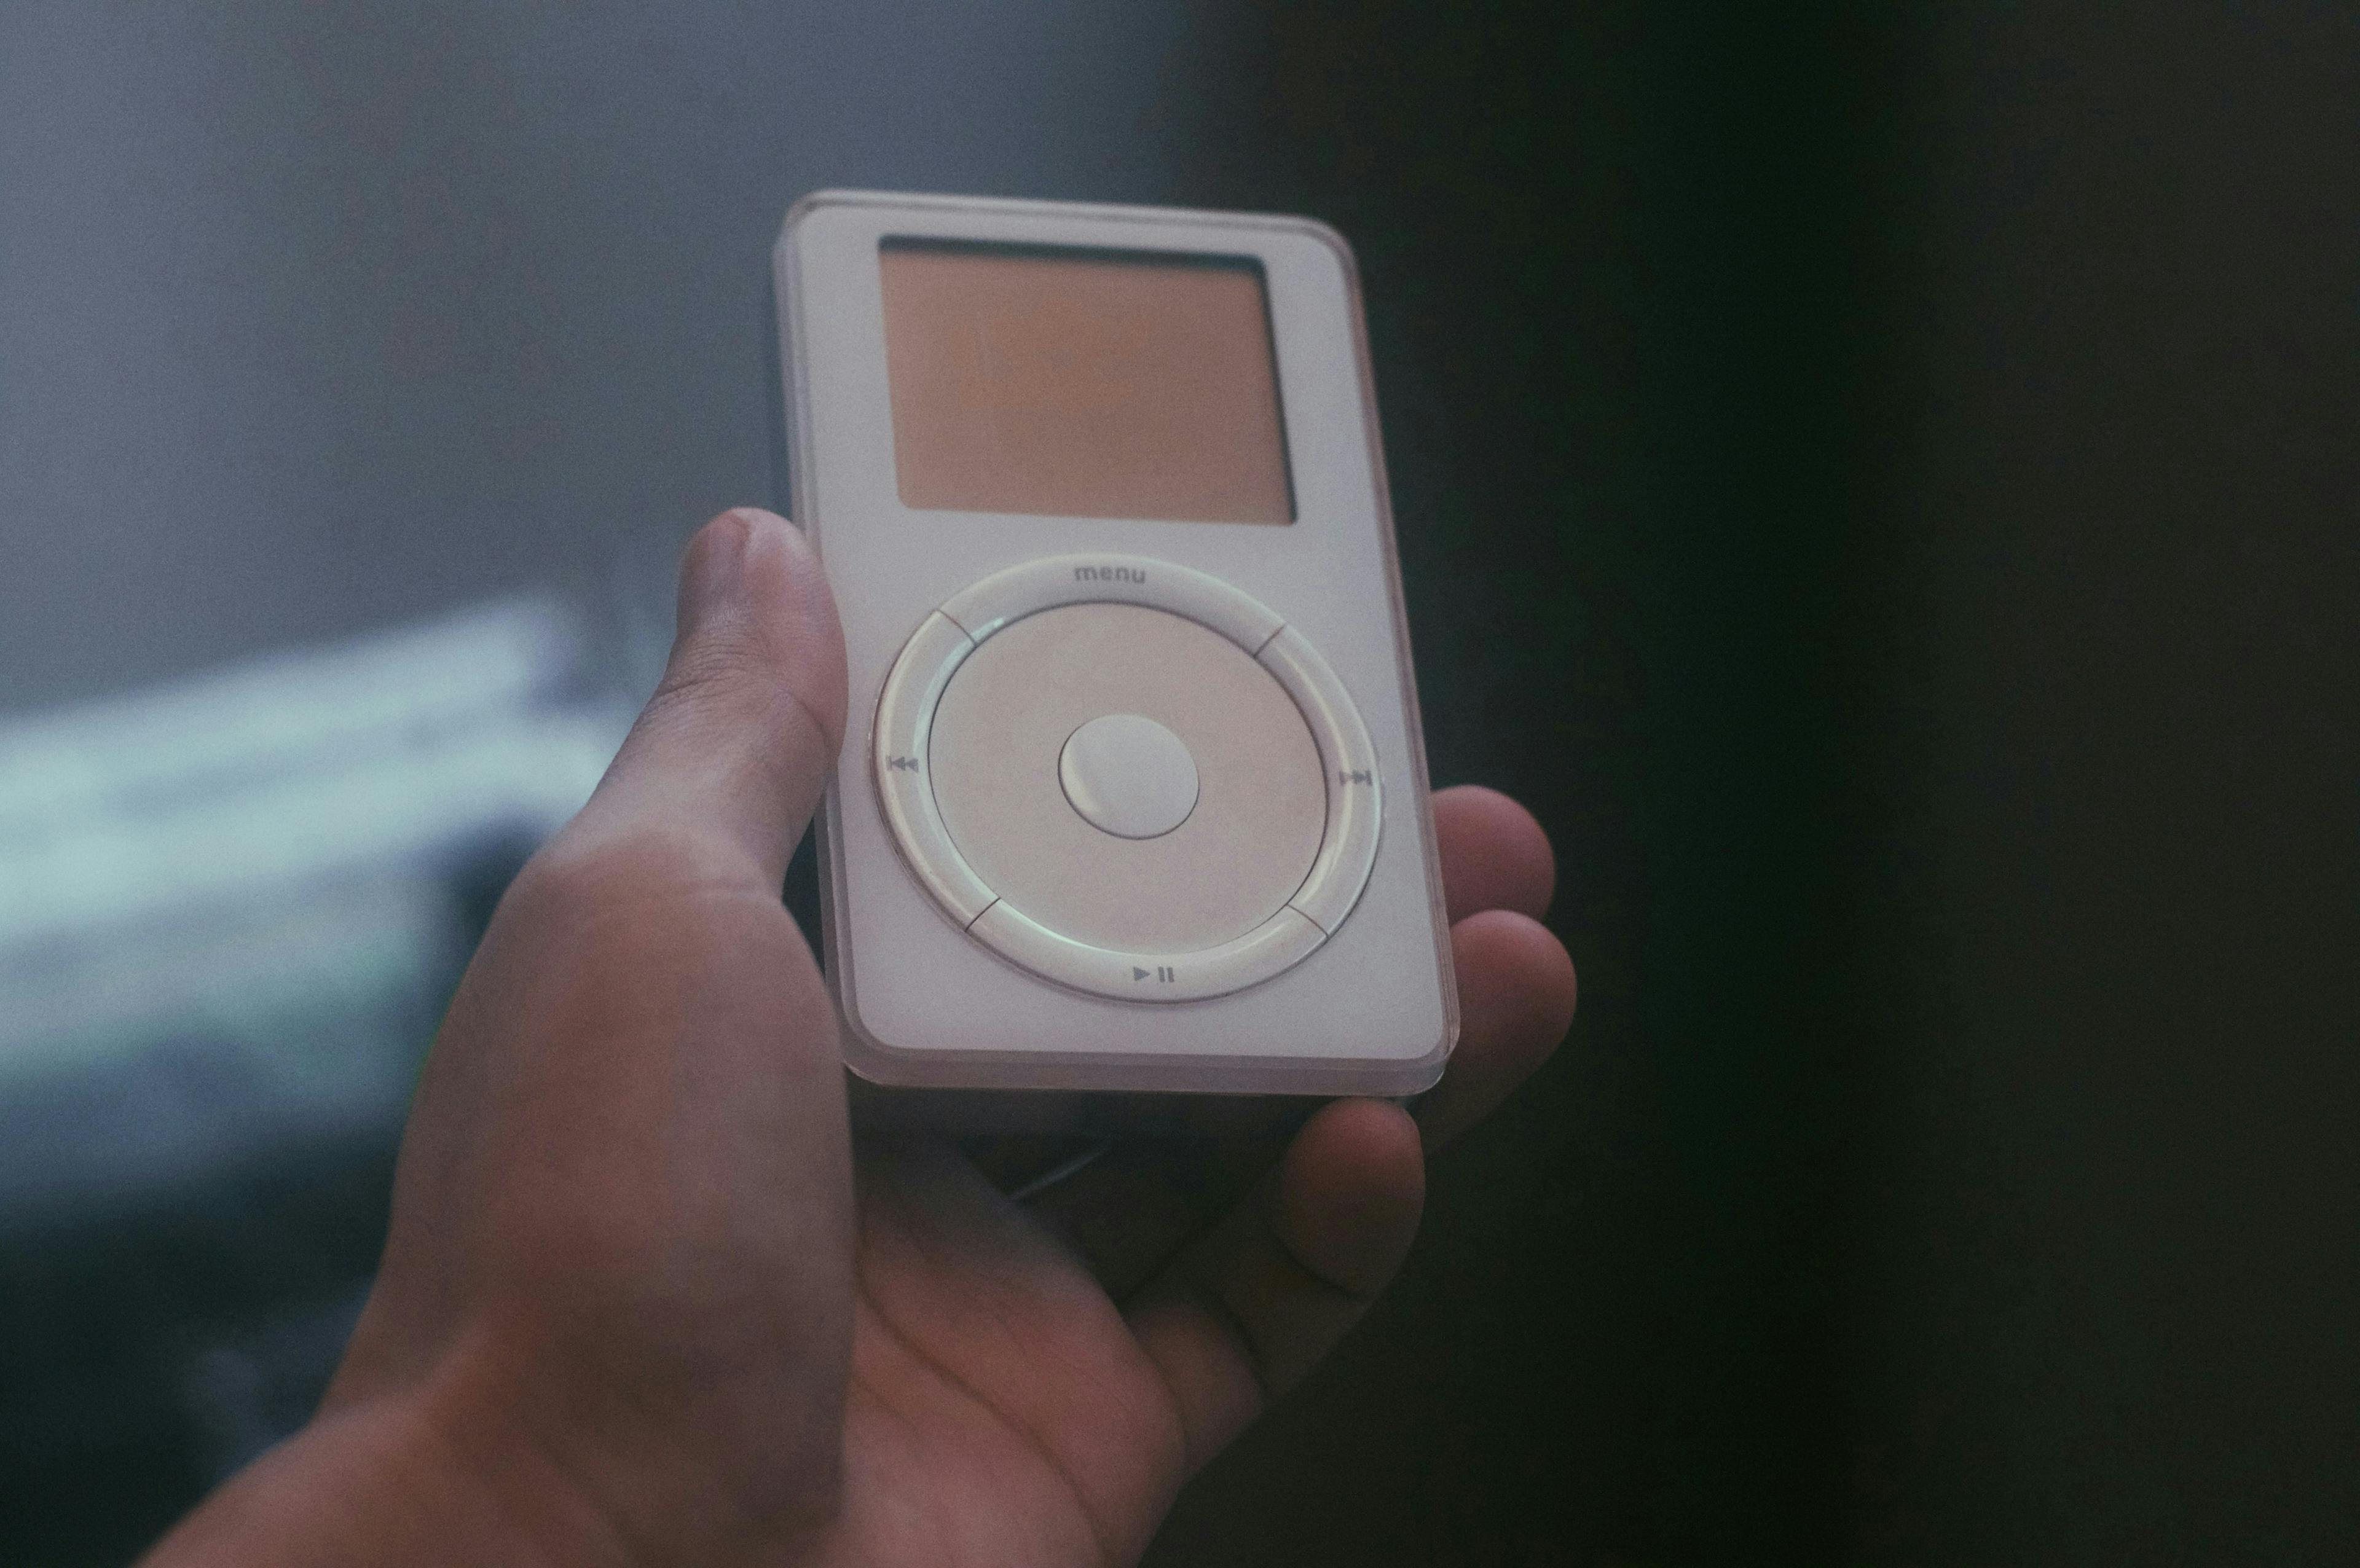 First generation iPod Classic.